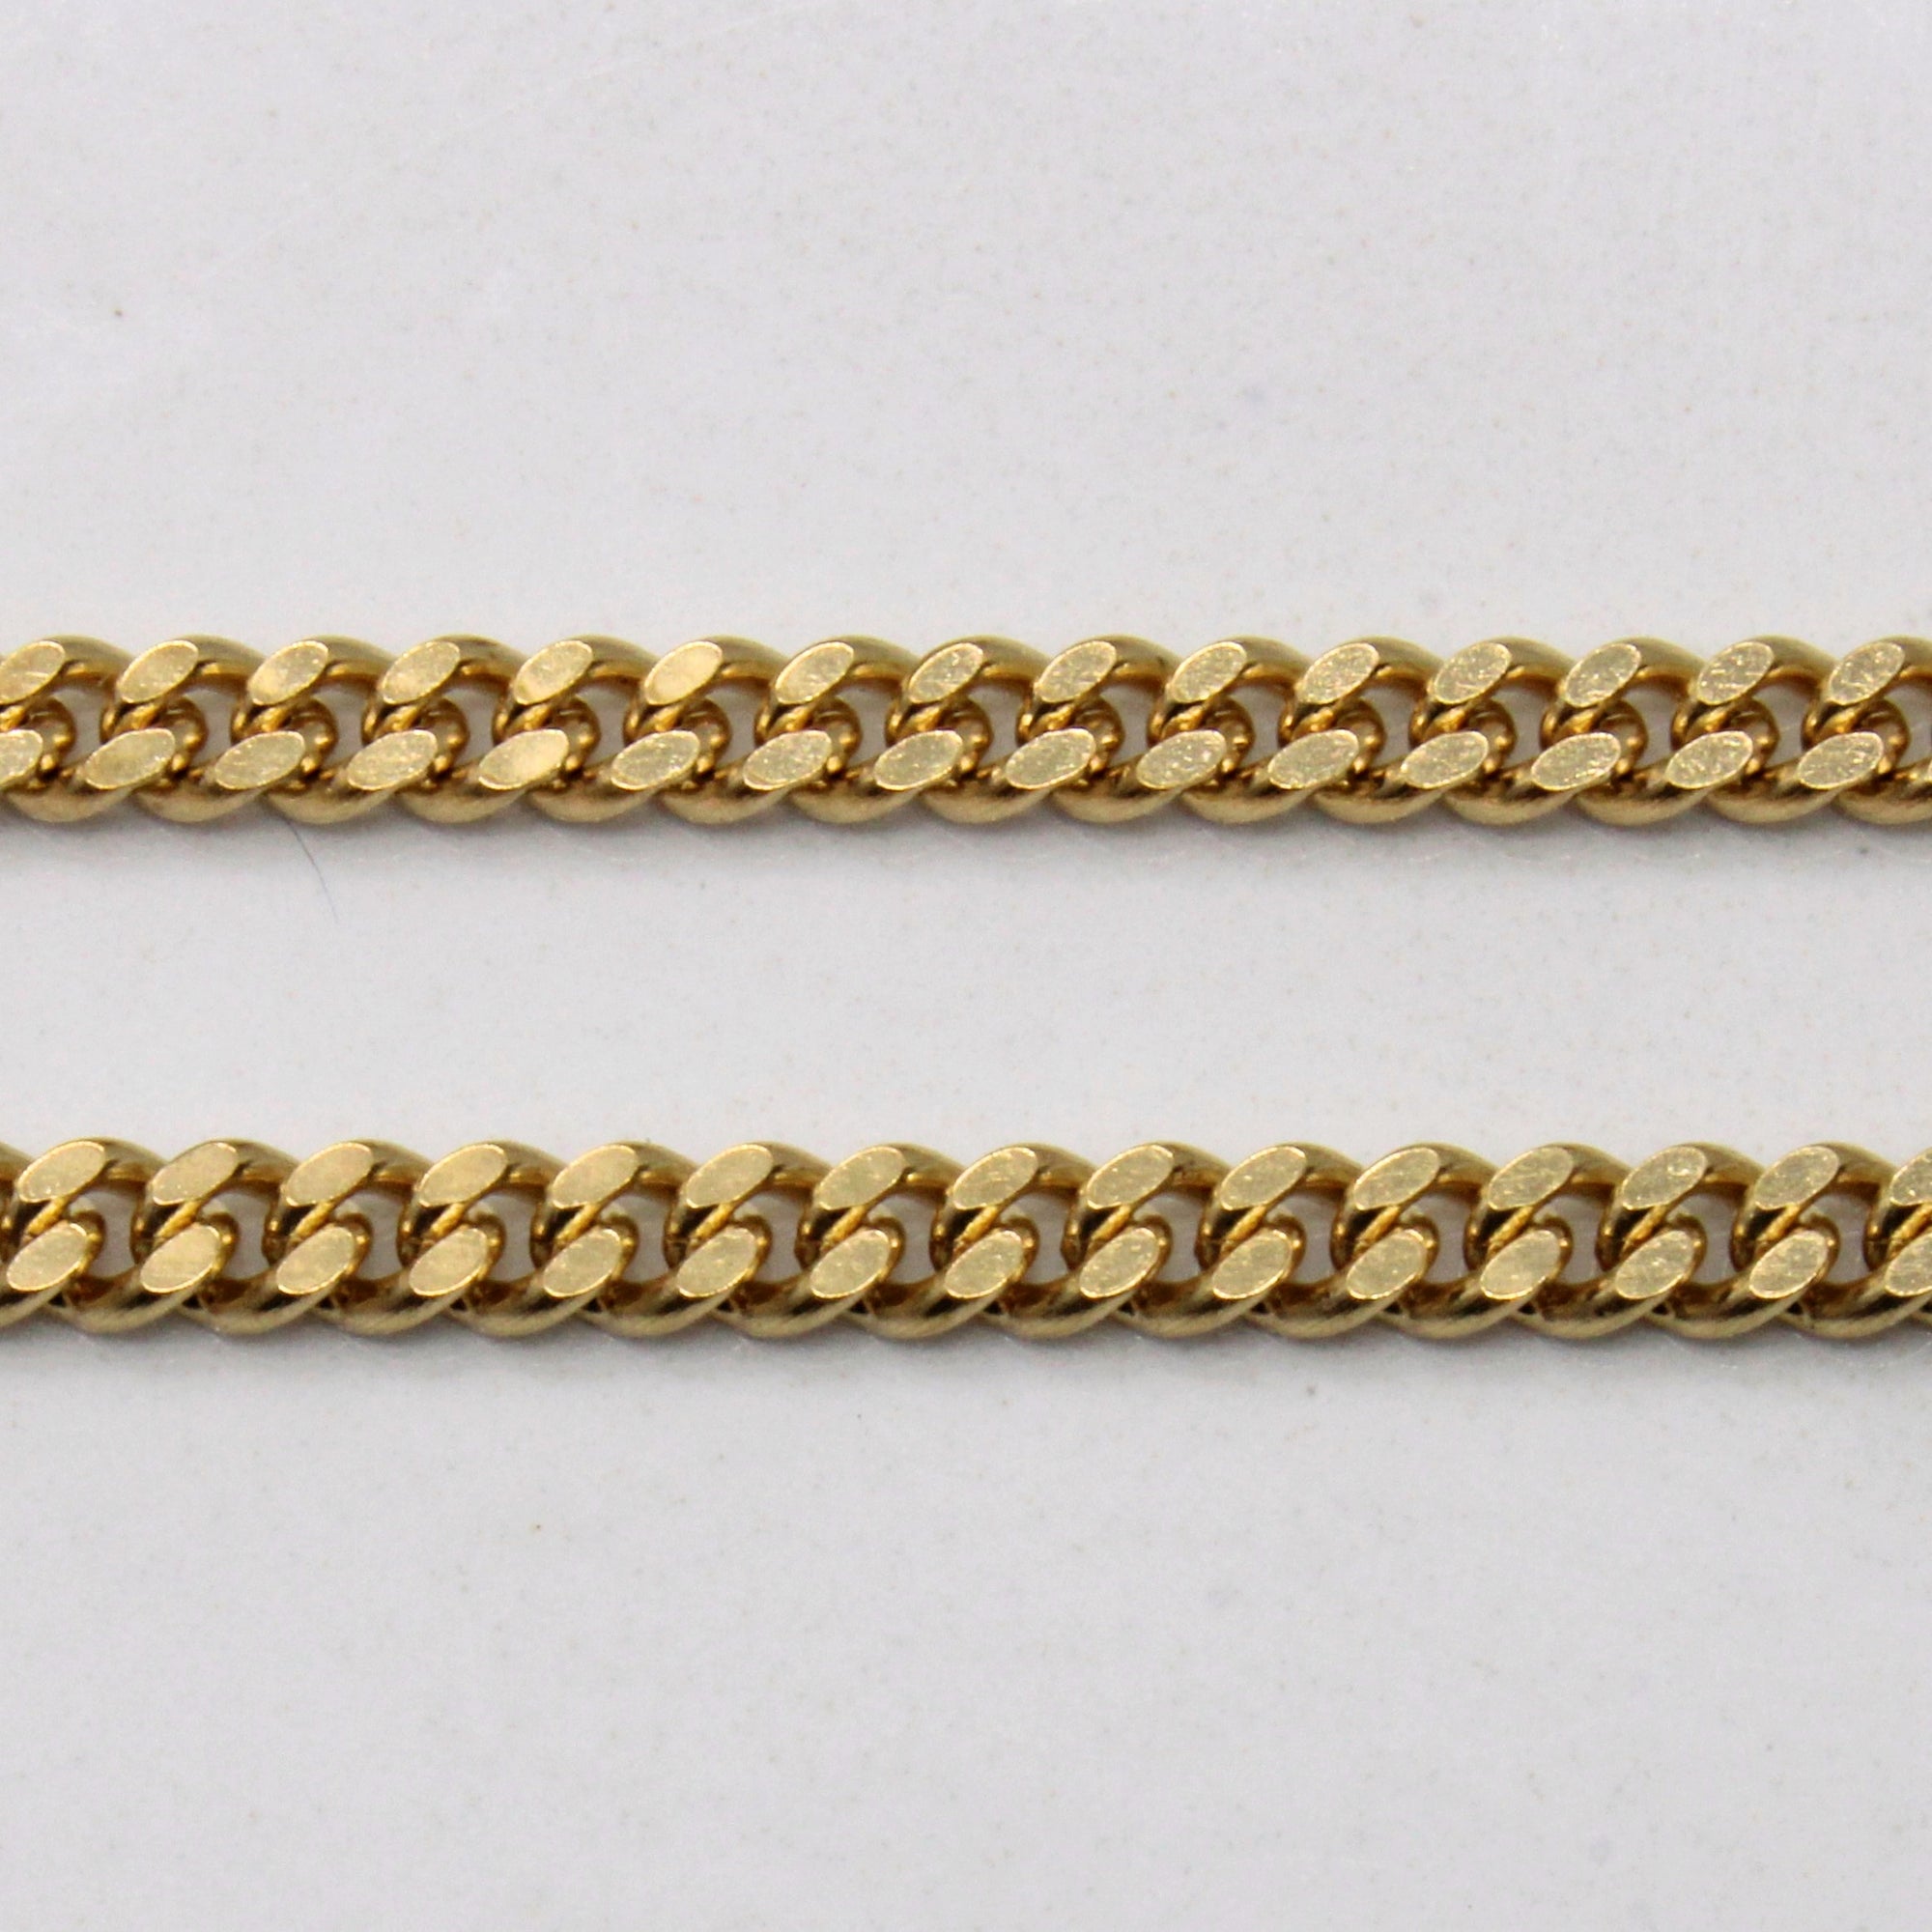 10k Yellow Gold Curb Link Chain | 15